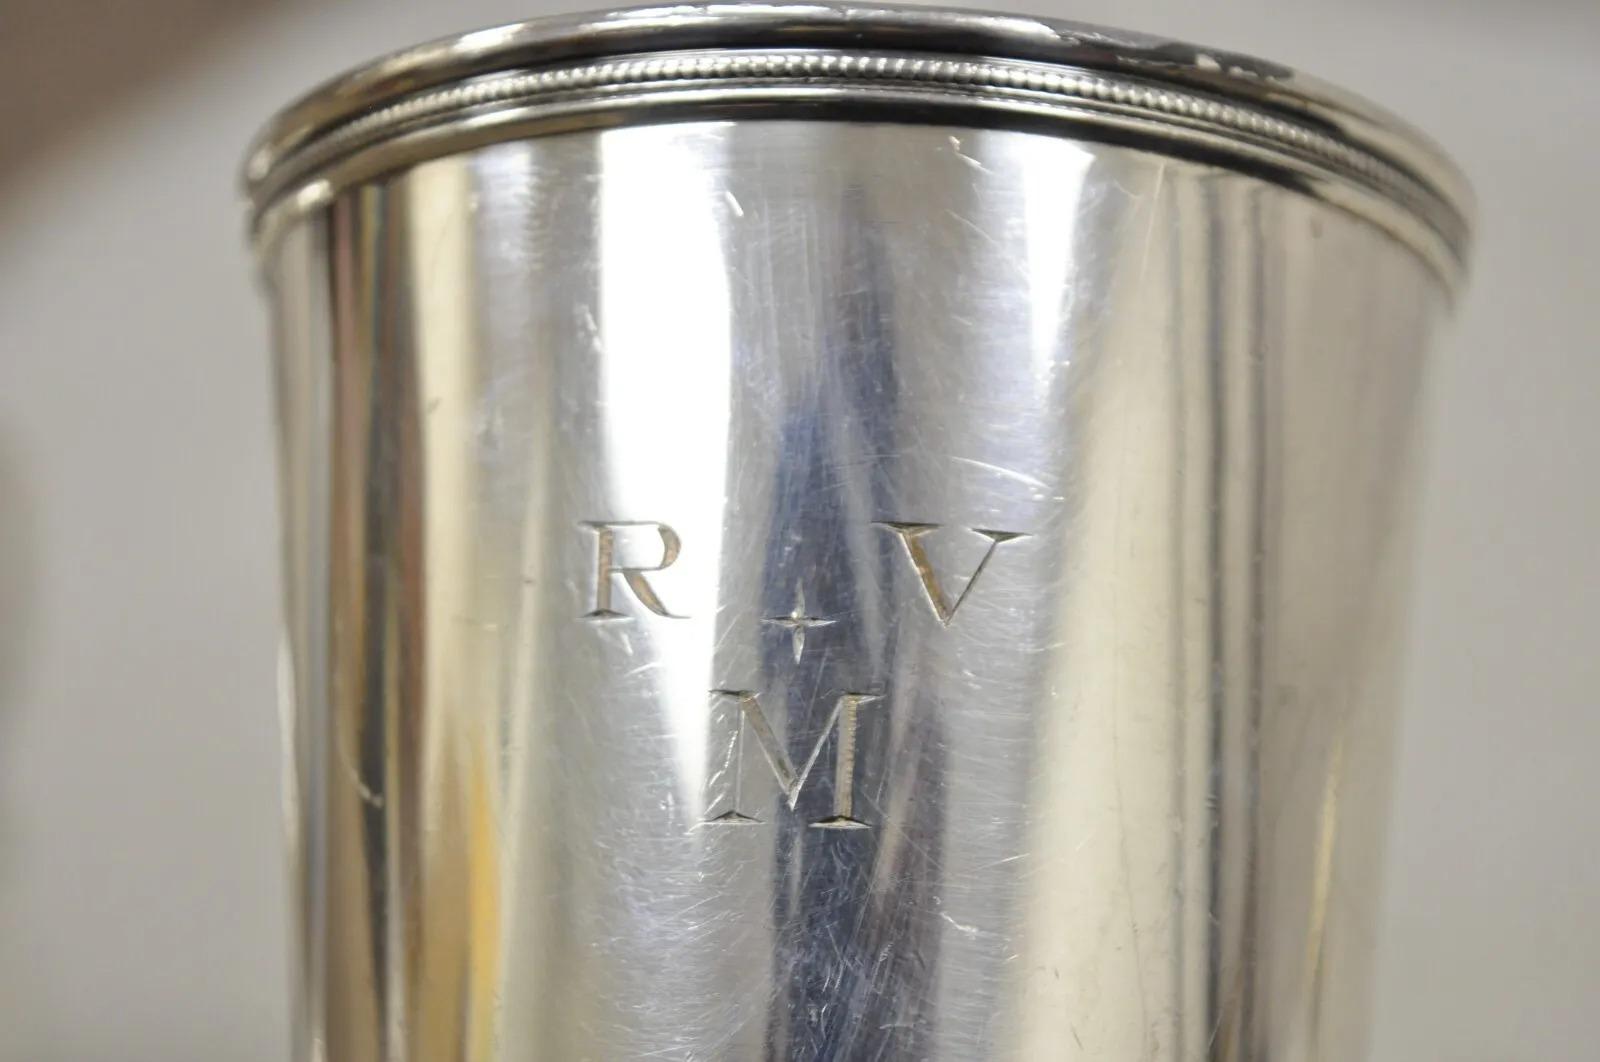 2 Vintage Silver Plated Mint Julep Cups Tumblers 1 with Monogram - 2 Pieces In Good Condition For Sale In Philadelphia, PA